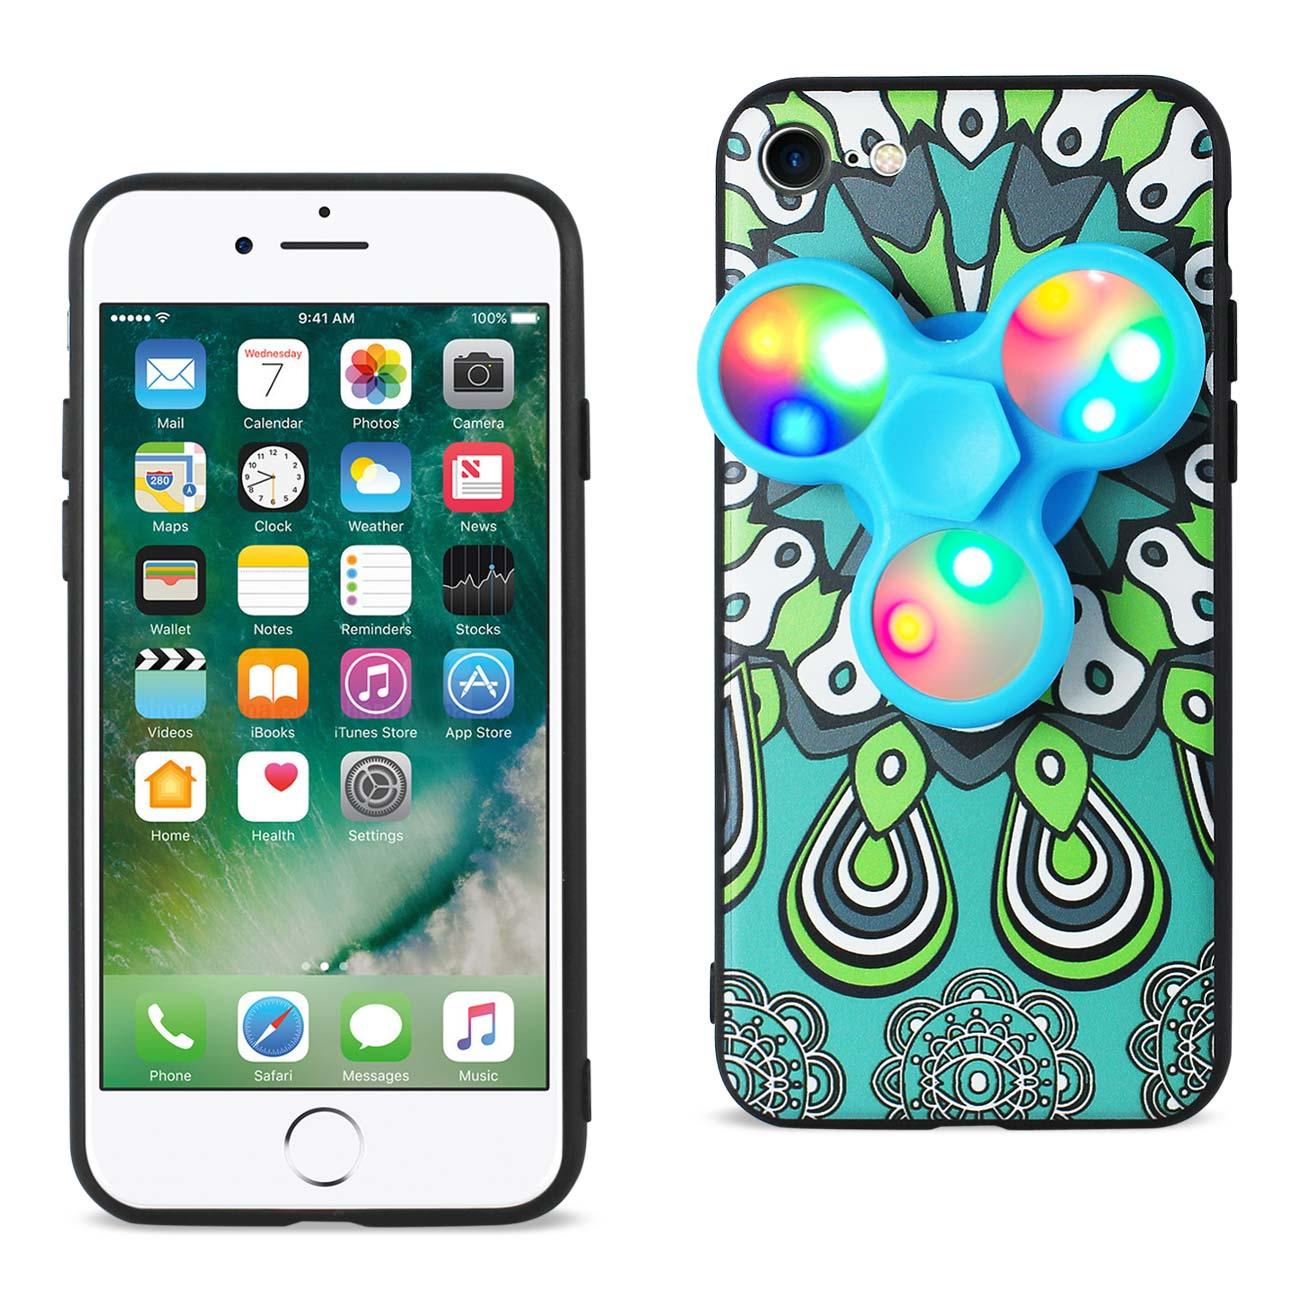  Original Liquid Rainbow Silicone Case Cover for Apple iPhone 11  Pro Max SE2020 X XR Xs Max 7 8 Plus Rainbow Watchband Same Case with Retail  Box (for iPhone 11 Pro) 